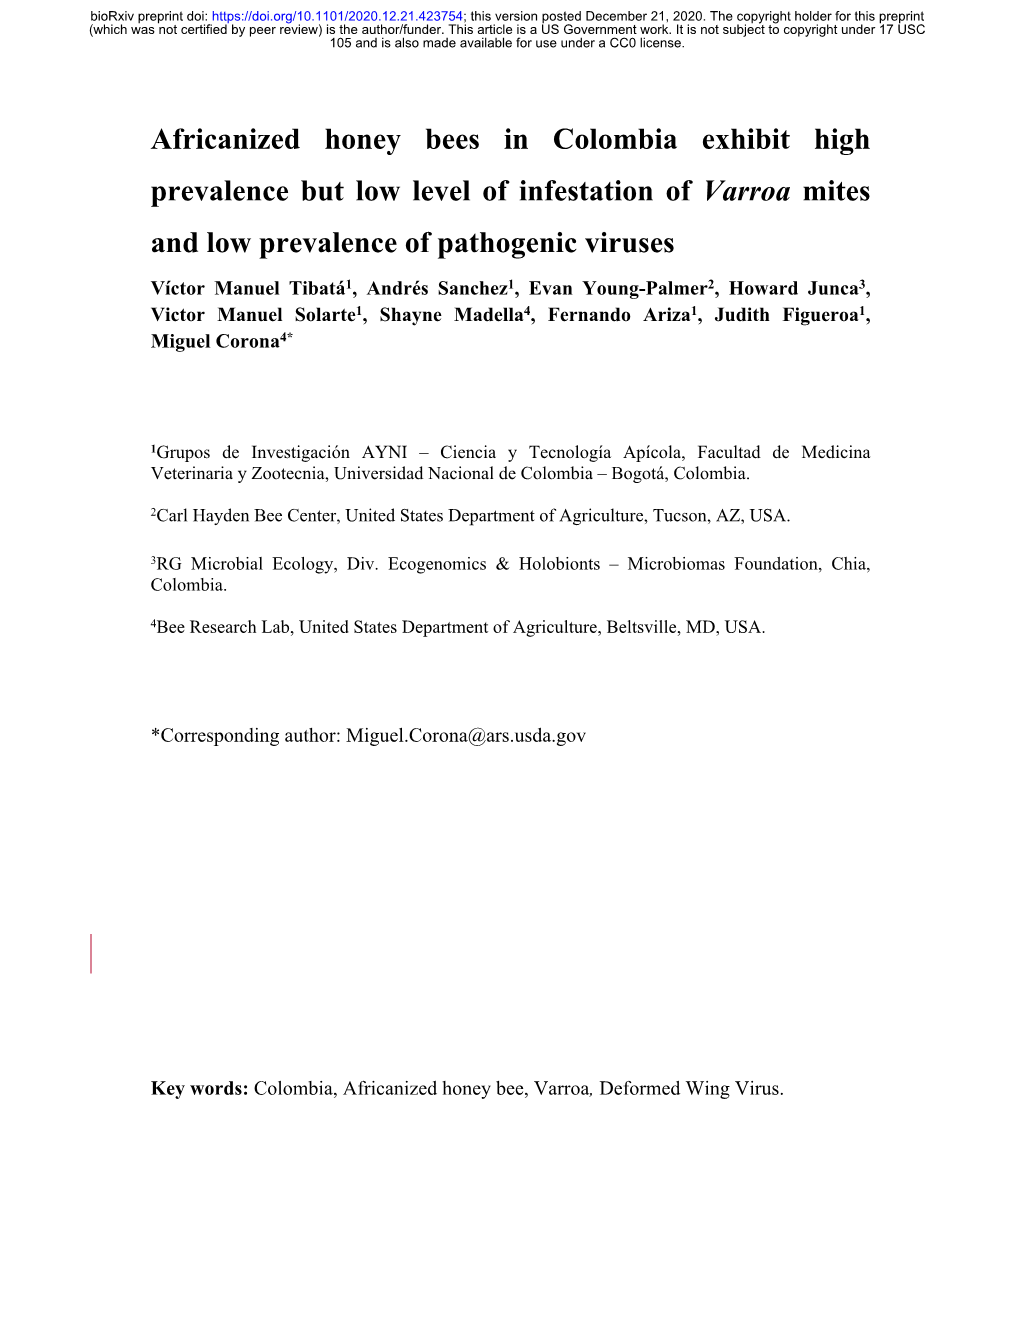 Africanized Honey Bees in Colombia Exhibit High Prevalence but Low Level of Infestation of Varroa Mites and Low Prevalence of Pathogenic Viruses